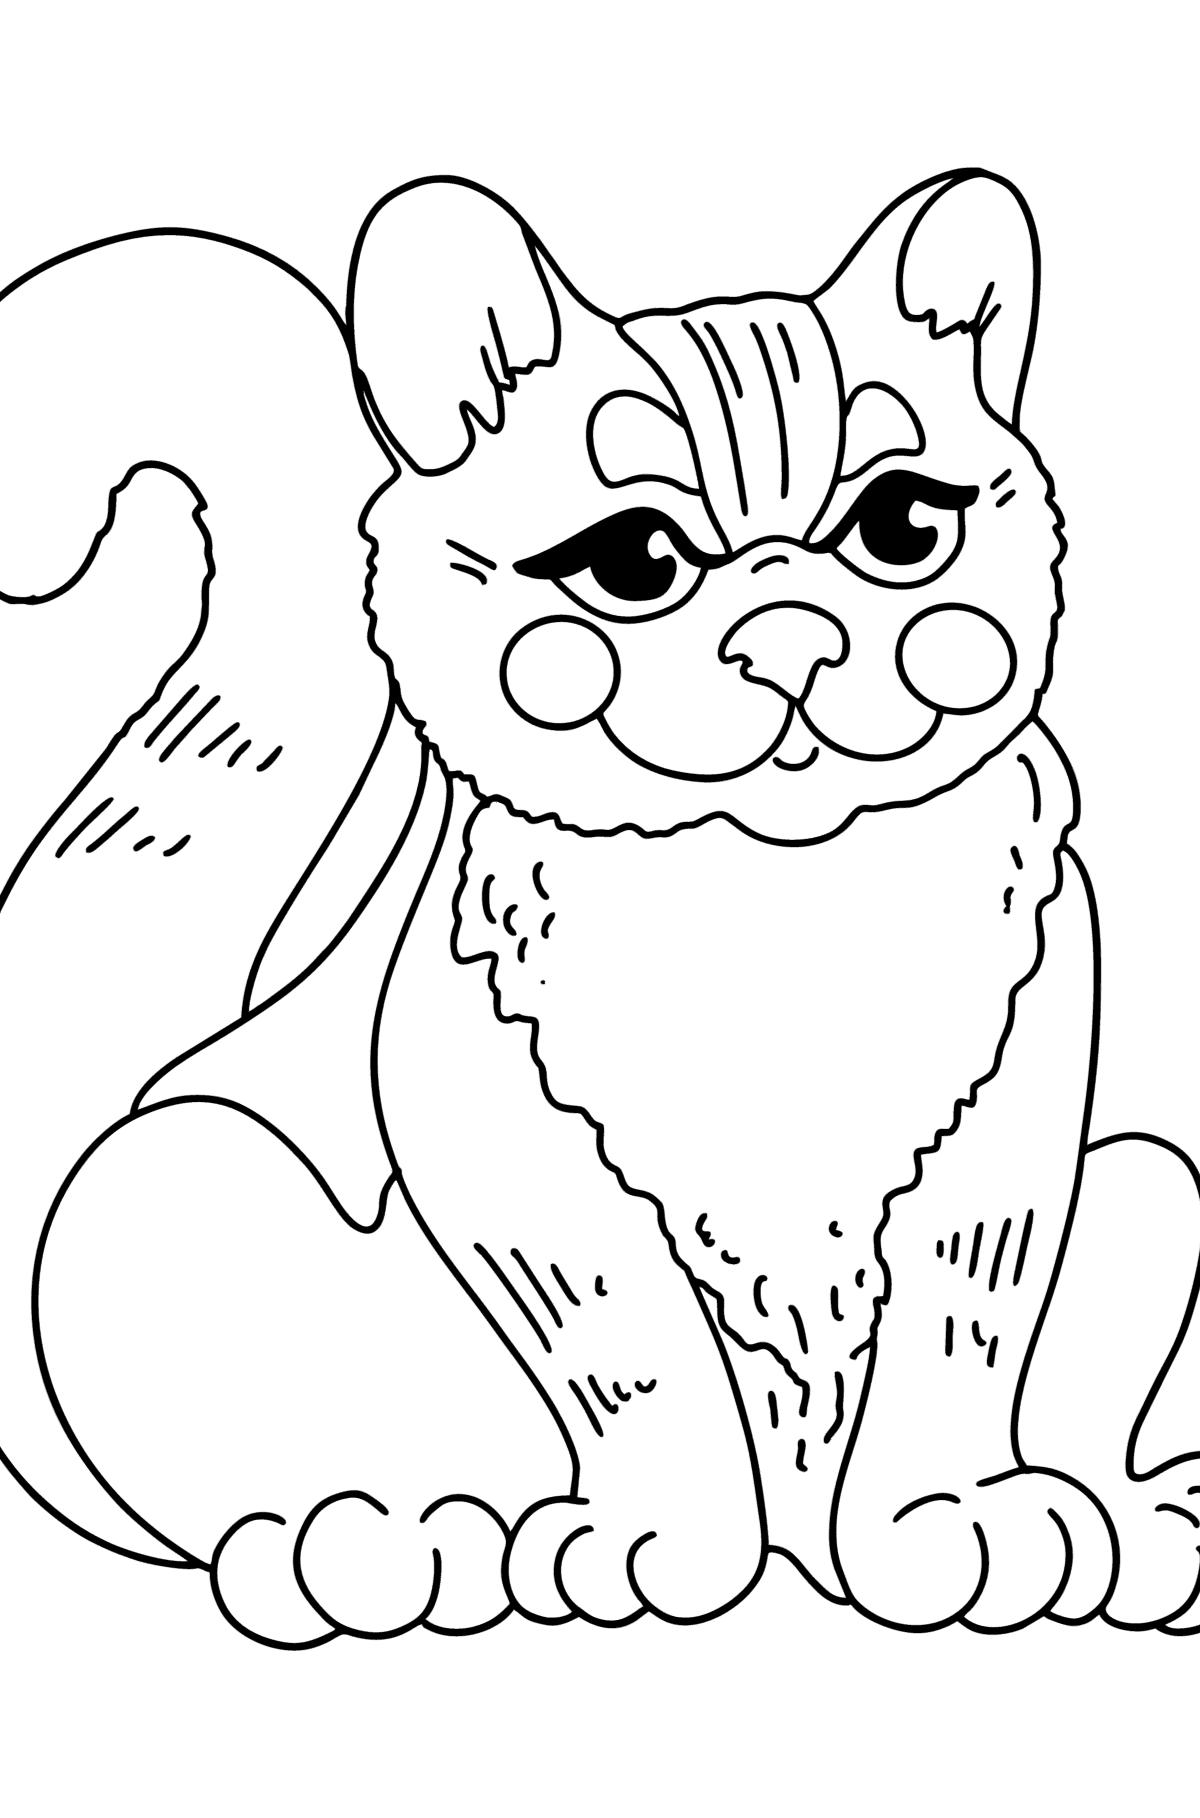 Cartoon Kitten coloring page - Coloring Pages for Kids